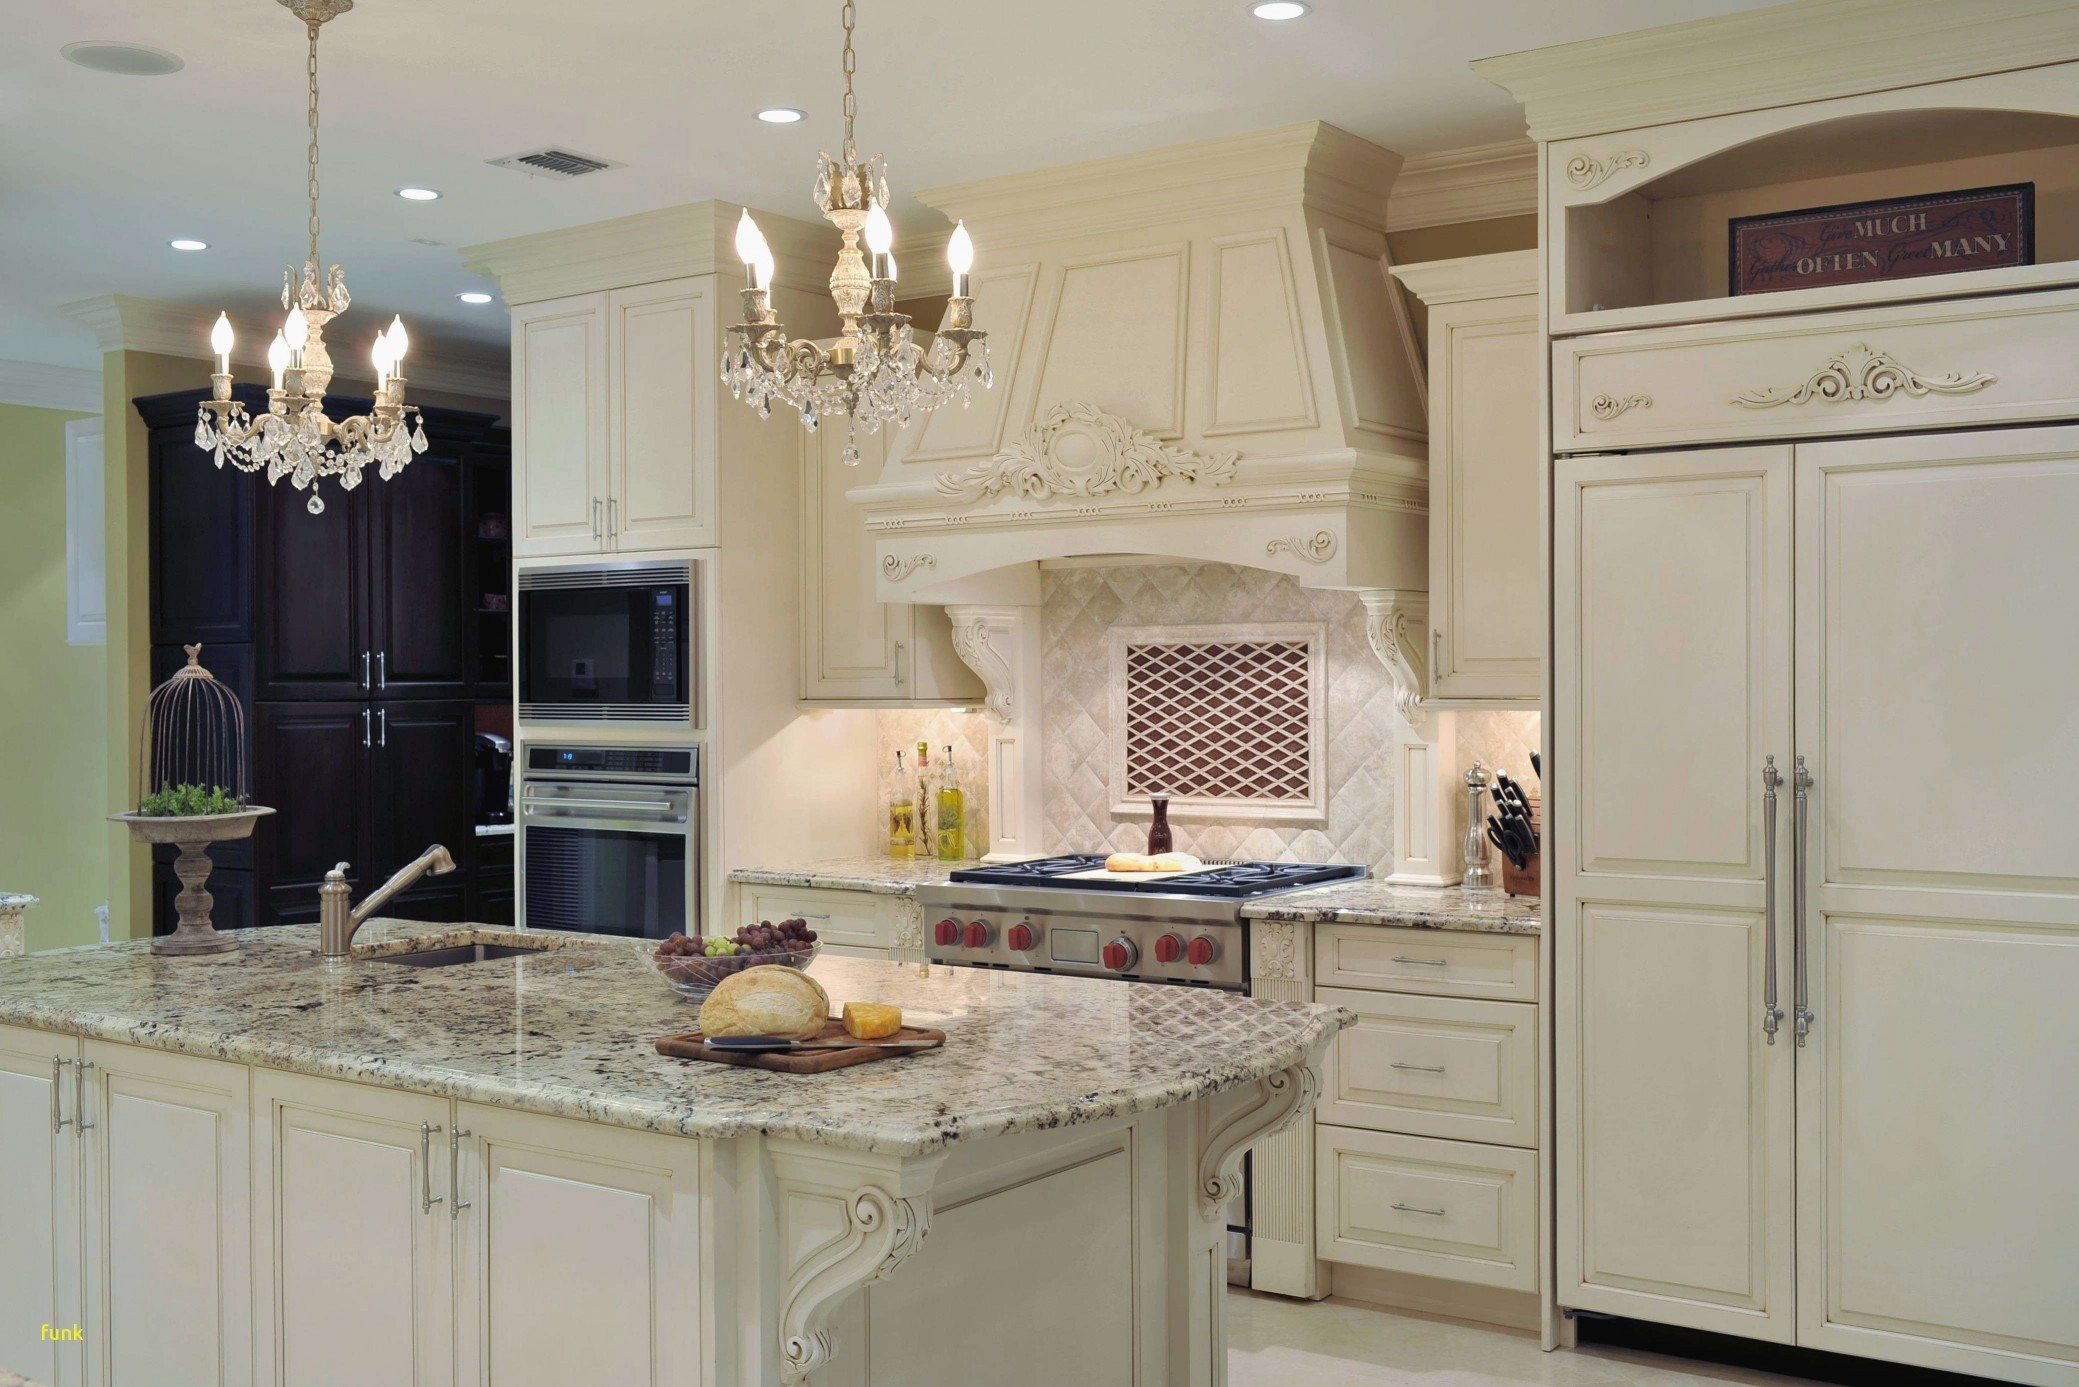 Astounding Discount Kitchen Cabinets Solid Wood Ideas Or Exceptional for size 2079 X 1387